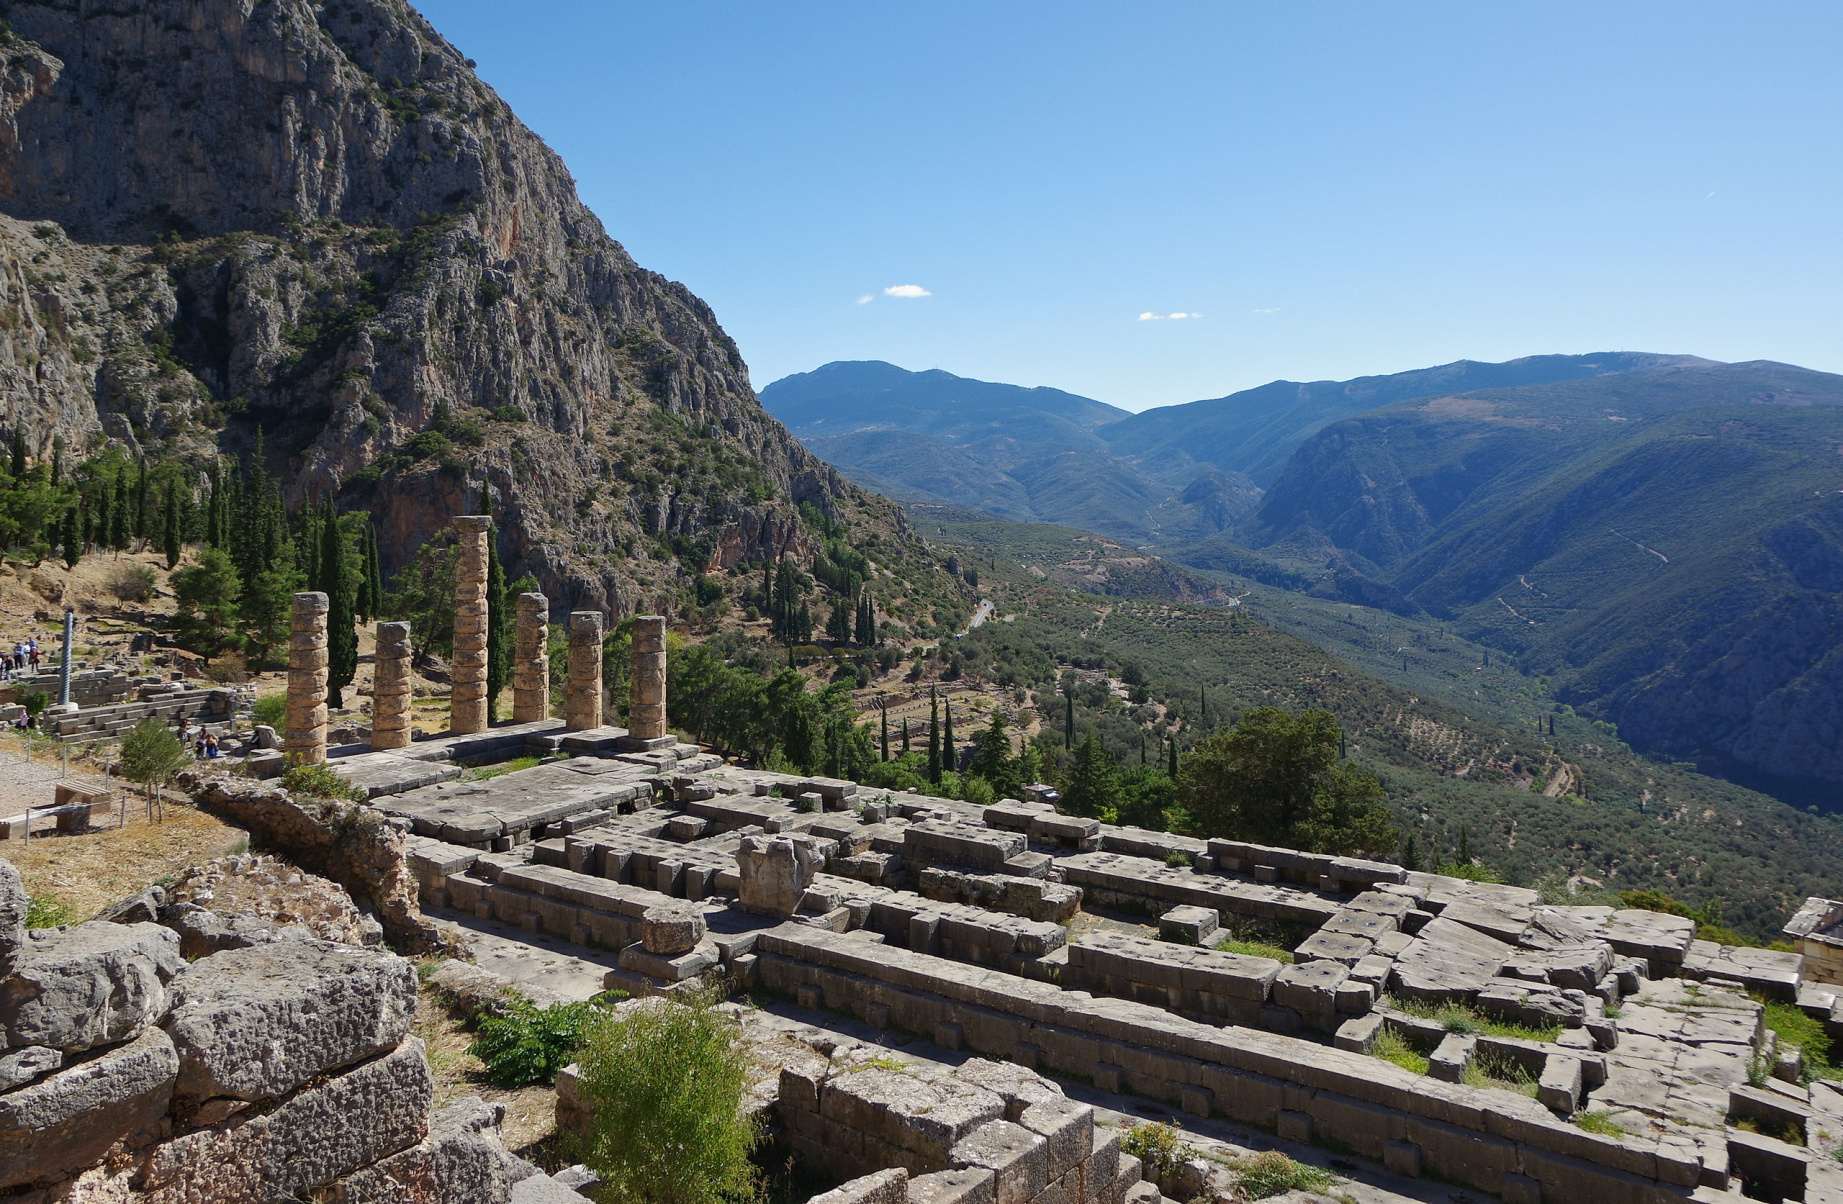 Modern photograph of the ruins of the Temple of Apollo/Delphi, where Themistoclea lived and taught Pythagoras his ways.